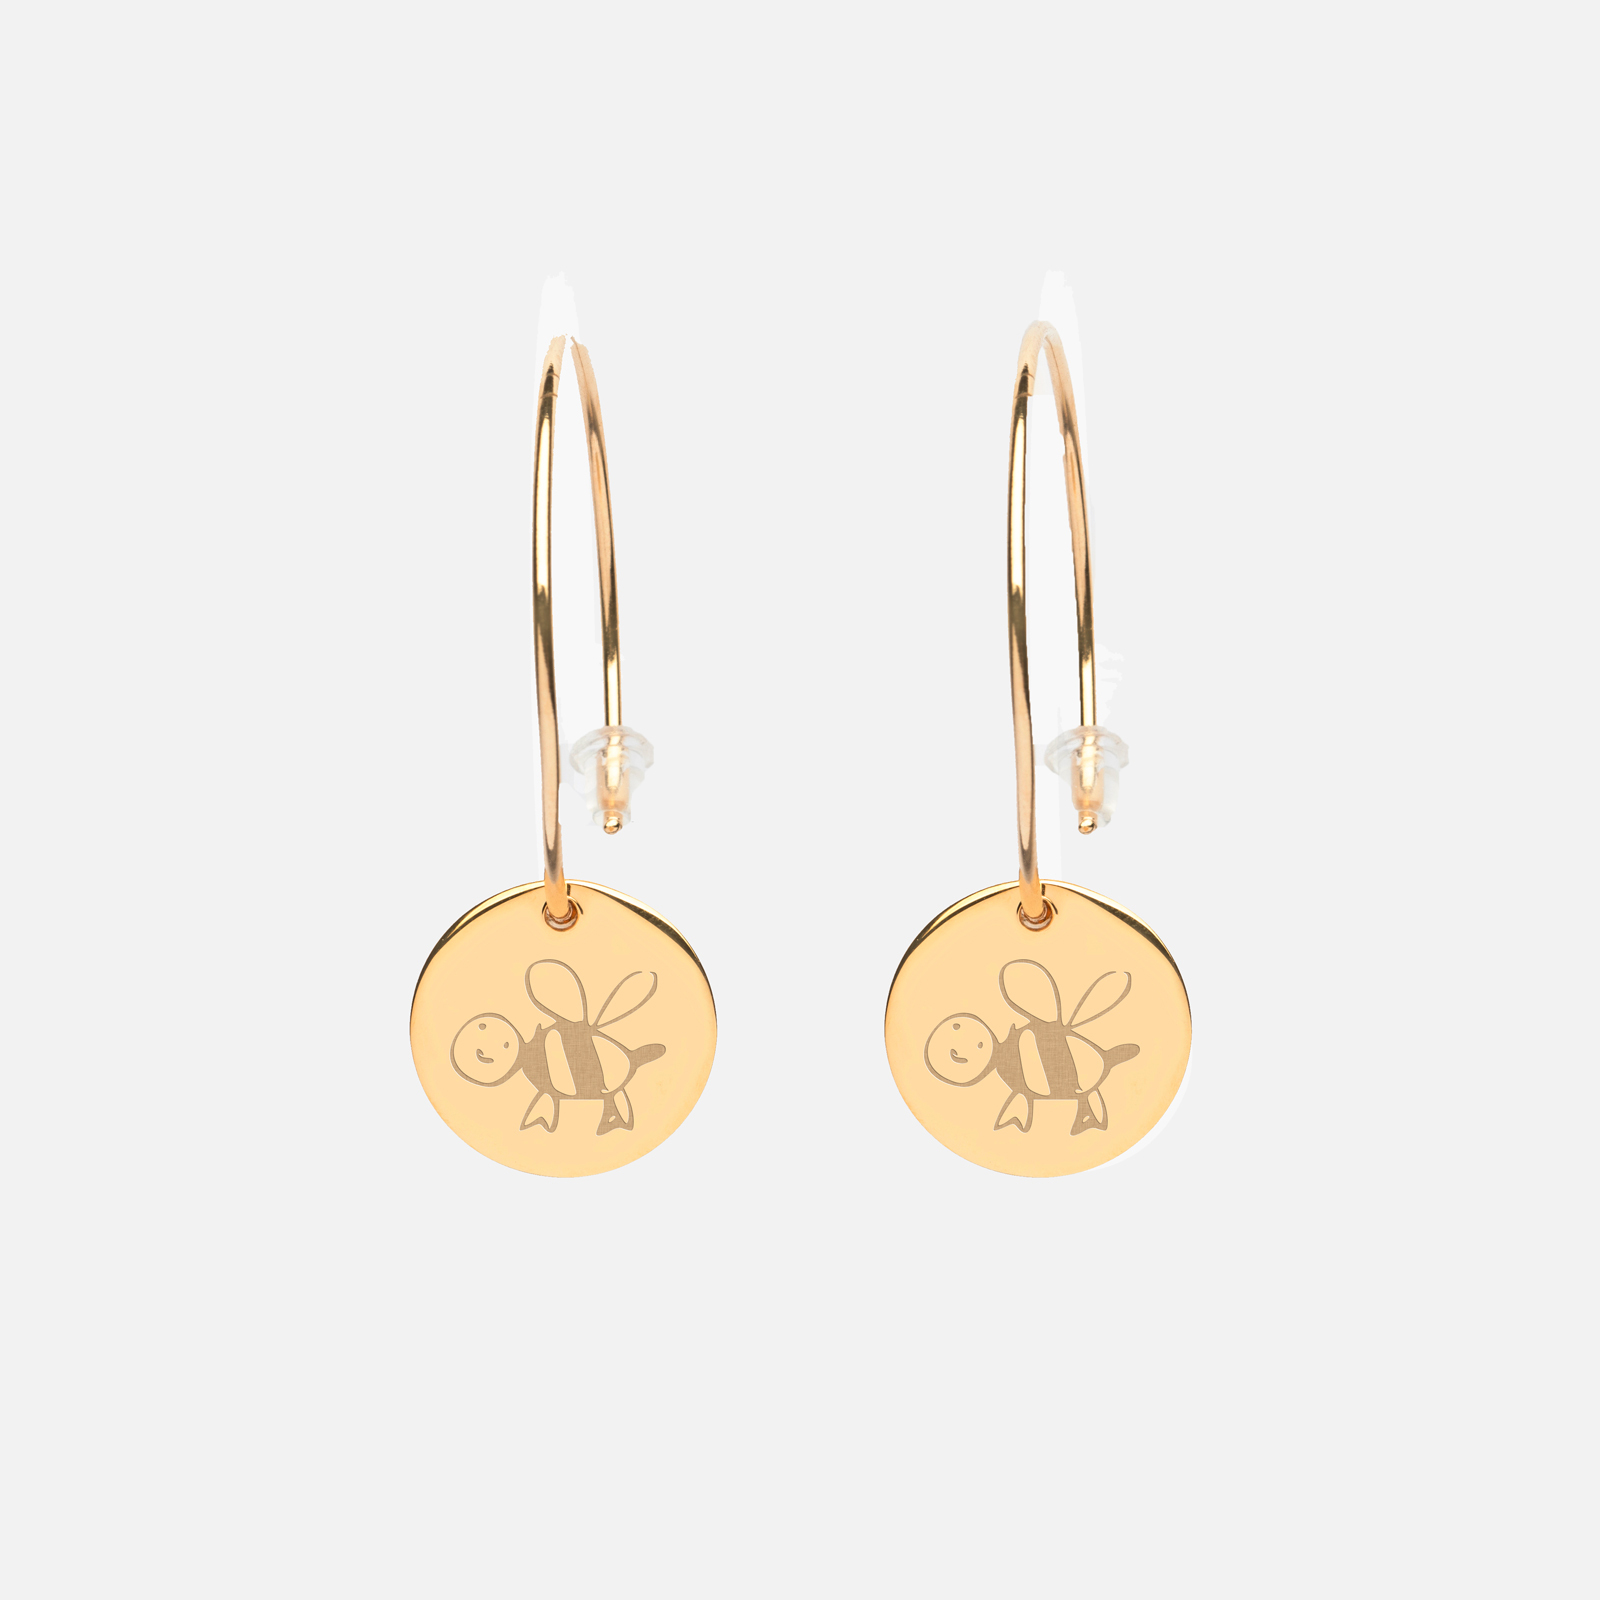 Creole earrings personalised with engraved gold-plated medals 15 mm